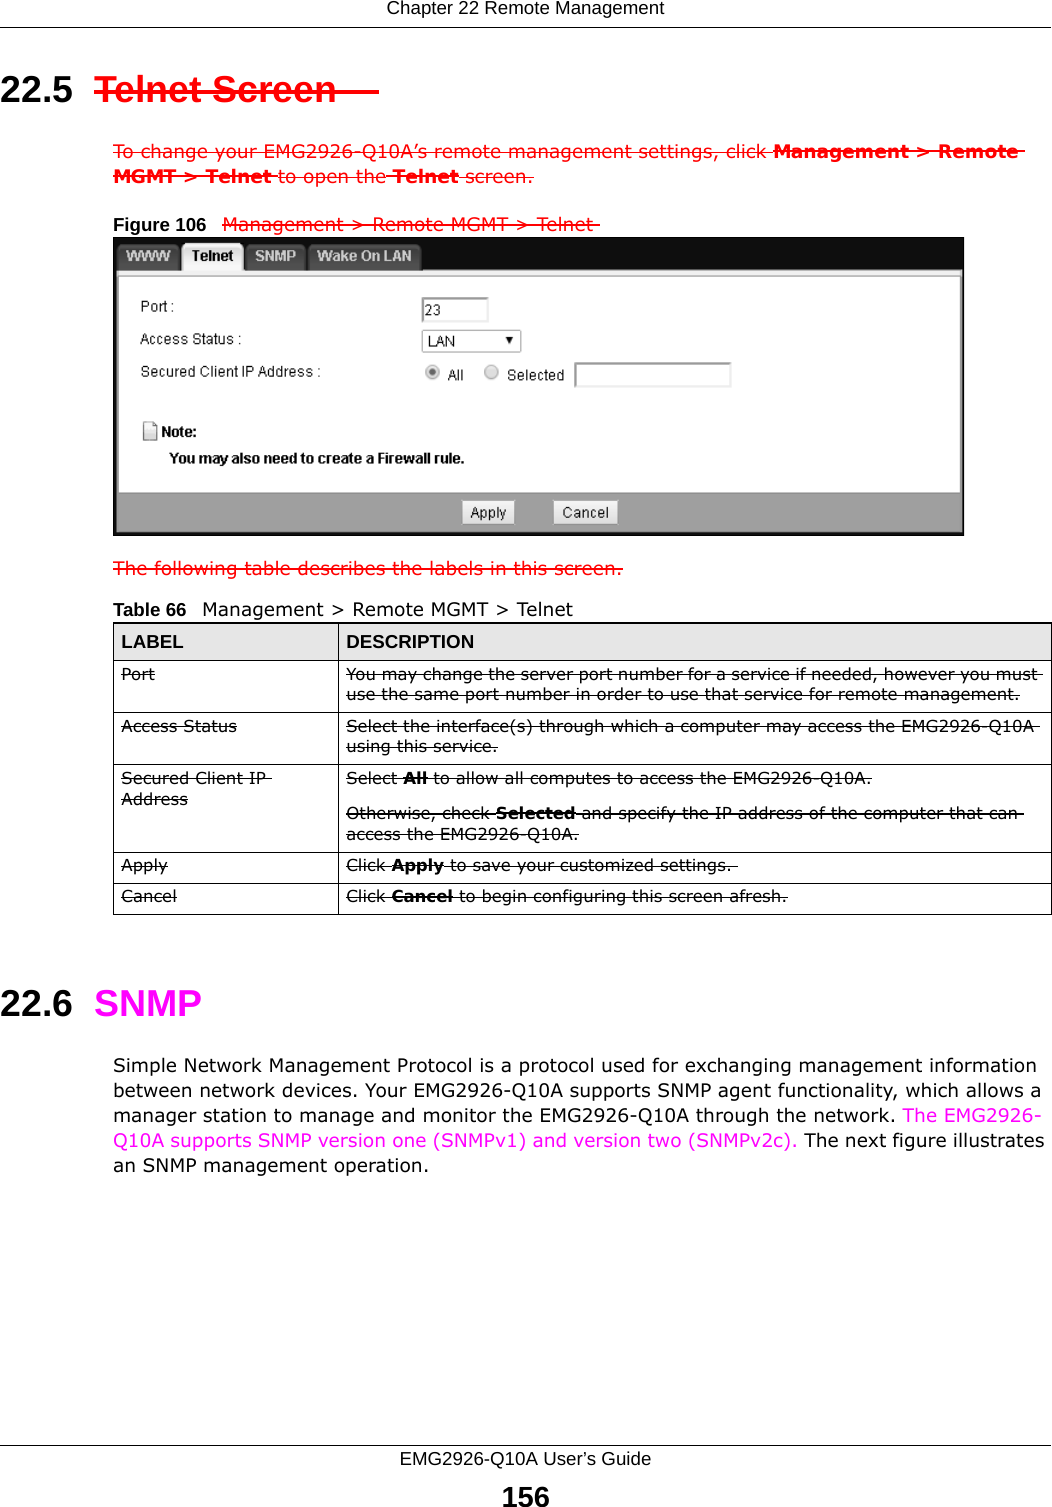 Chapter 22 Remote ManagementEMG2926-Q10A User’s Guide15622.5  Telnet Screen    To change your EMG2926-Q10A’s remote management settings, click Management &gt; Remote MGMT &gt; Telnet to open the Telnet screen.Figure 106   Management &gt; Remote MGMT &gt; Telnet The following table describes the labels in this screen.22.6  SNMPSimple Network Management Protocol is a protocol used for exchanging management information between network devices. Your EMG2926-Q10A supports SNMP agent functionality, which allows a manager station to manage and monitor the EMG2926-Q10A through the network. The EMG2926-Q10A supports SNMP version one (SNMPv1) and version two (SNMPv2c). The next figure illustrates an SNMP management operation.   Table 66   Management &gt; Remote MGMT &gt; TelnetLABEL DESCRIPTIONPort You may change the server port number for a service if needed, however you must use the same port number in order to use that service for remote management.Access Status Select the interface(s) through which a computer may access the EMG2926-Q10A using this service.Secured Client IP AddressSelect All to allow all computes to access the EMG2926-Q10A.Otherwise, check Selected and specify the IP address of the computer that can access the EMG2926-Q10A.Apply Click Apply to save your customized settings. Cancel Click Cancel to begin configuring this screen afresh.